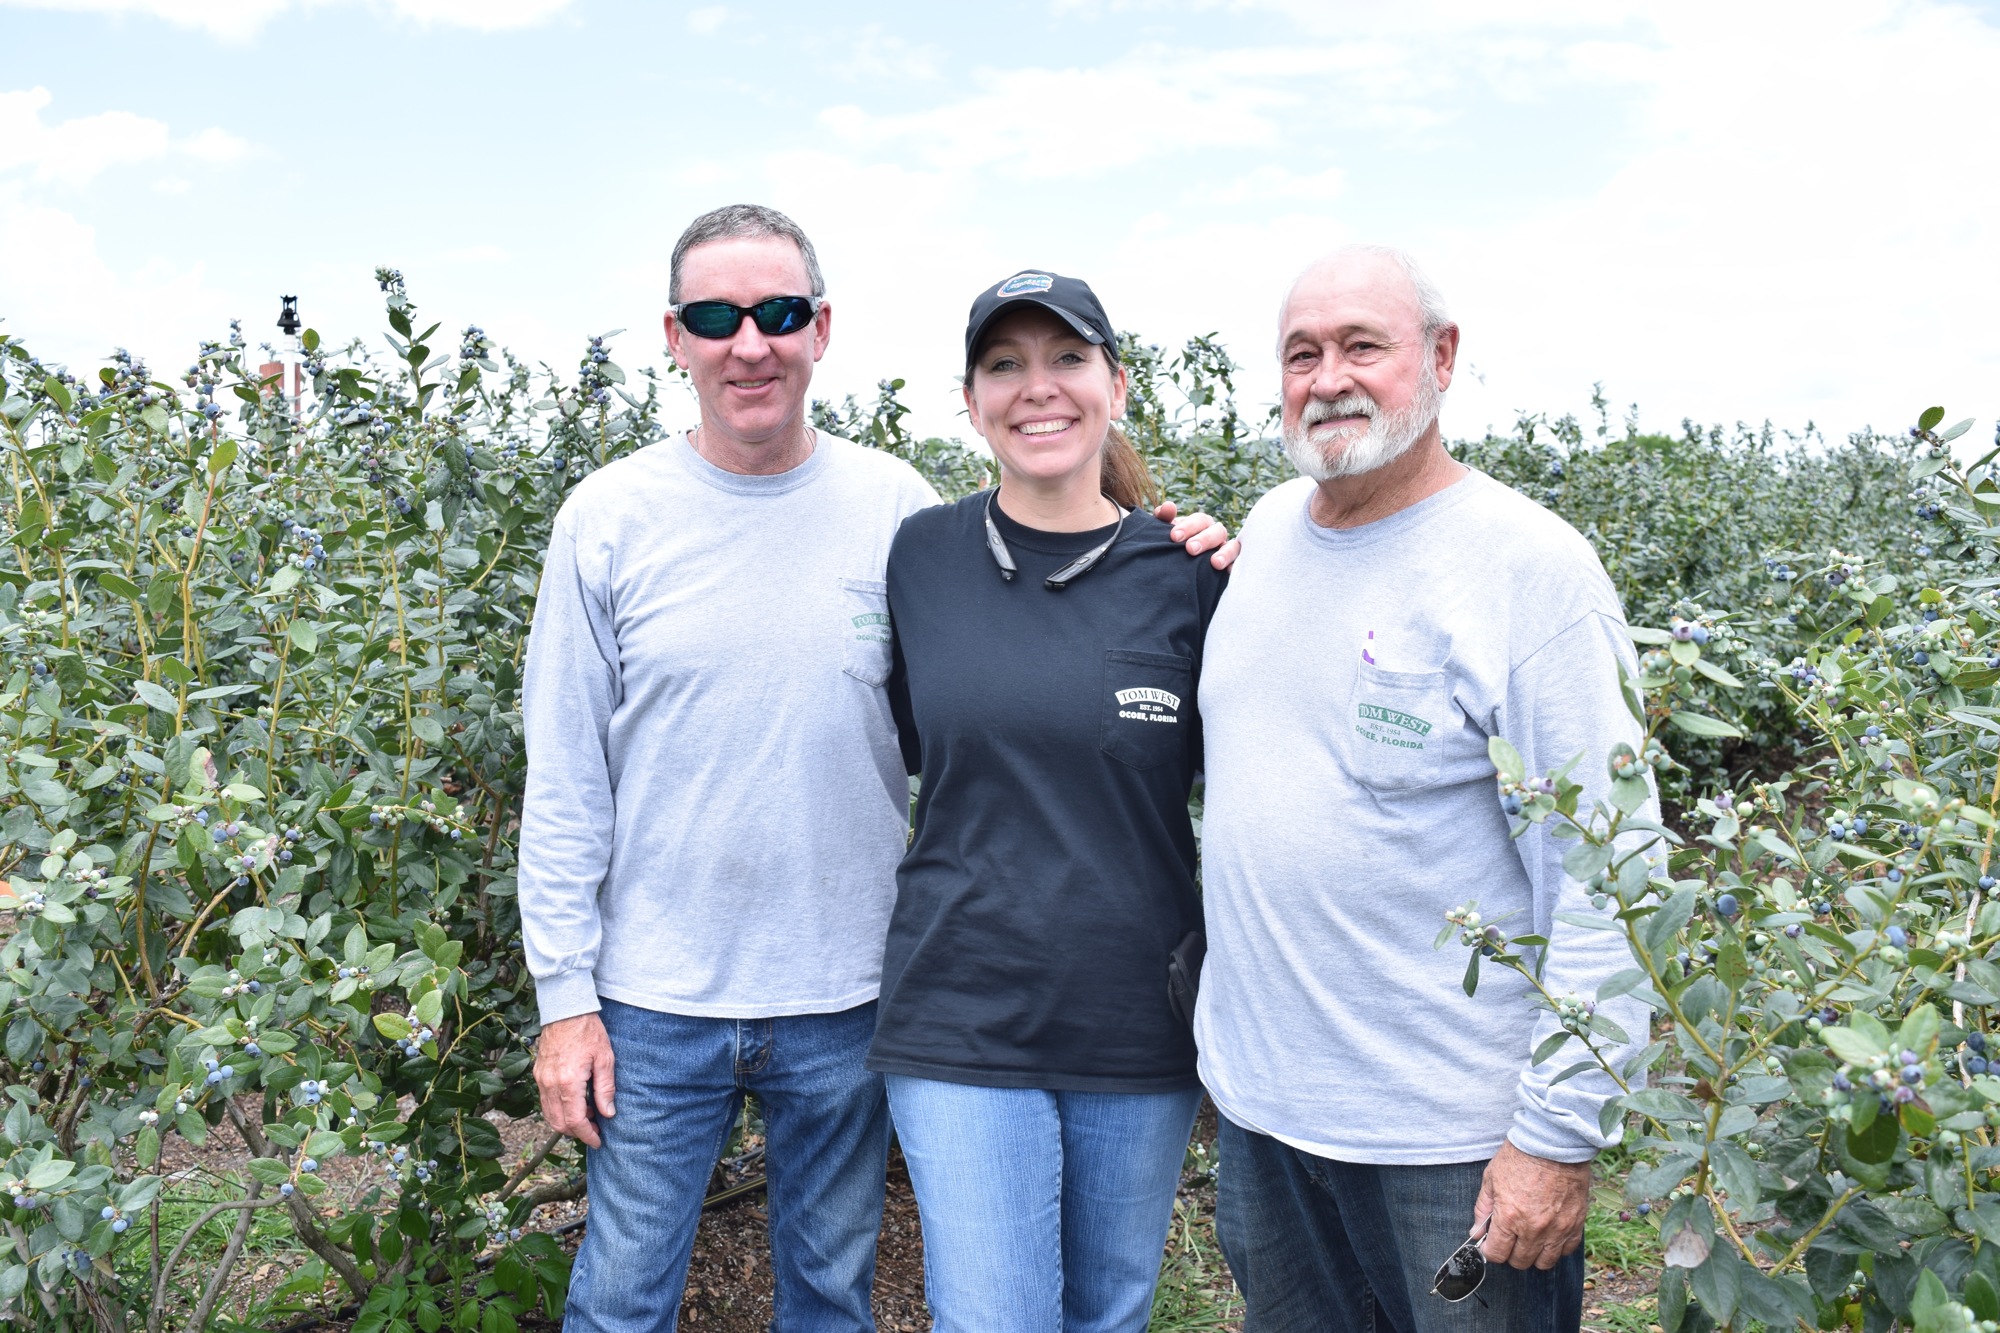 Scott West (grandson of Tom West), Stacy Williams and Gene Laird all help run Tom West Blueberries in Ocoee.